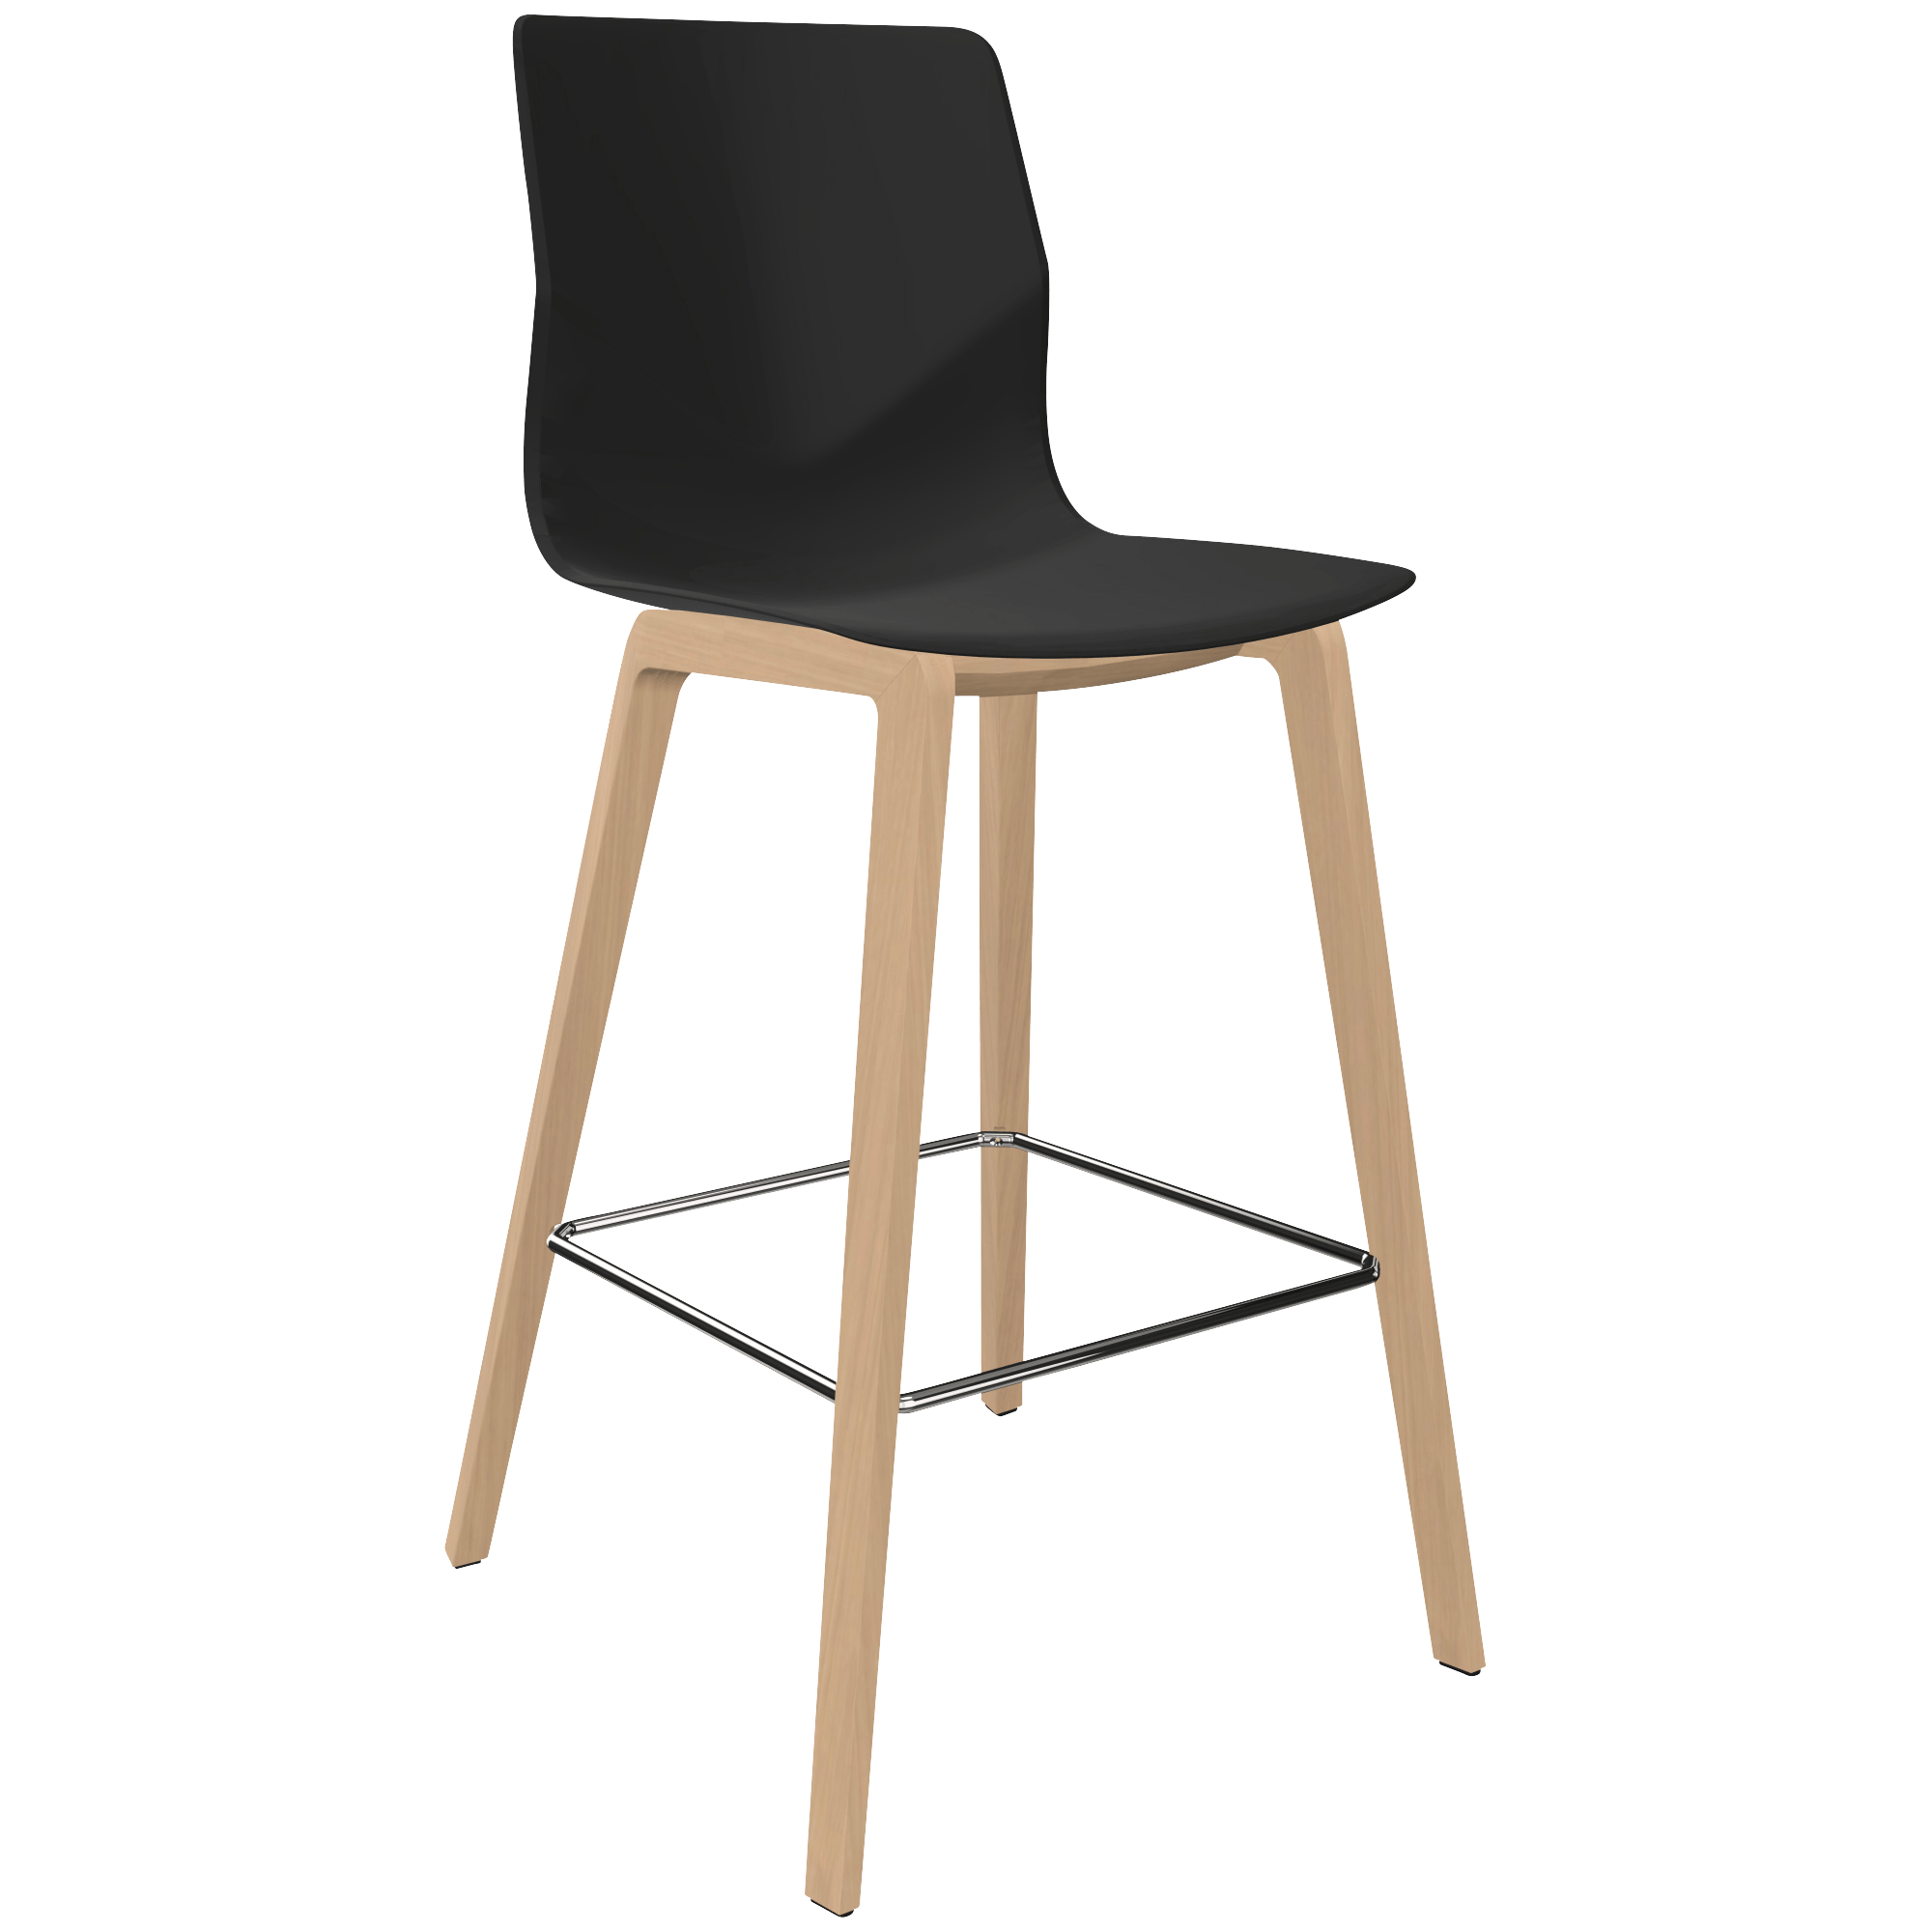 A black counter chair with wooden legs.